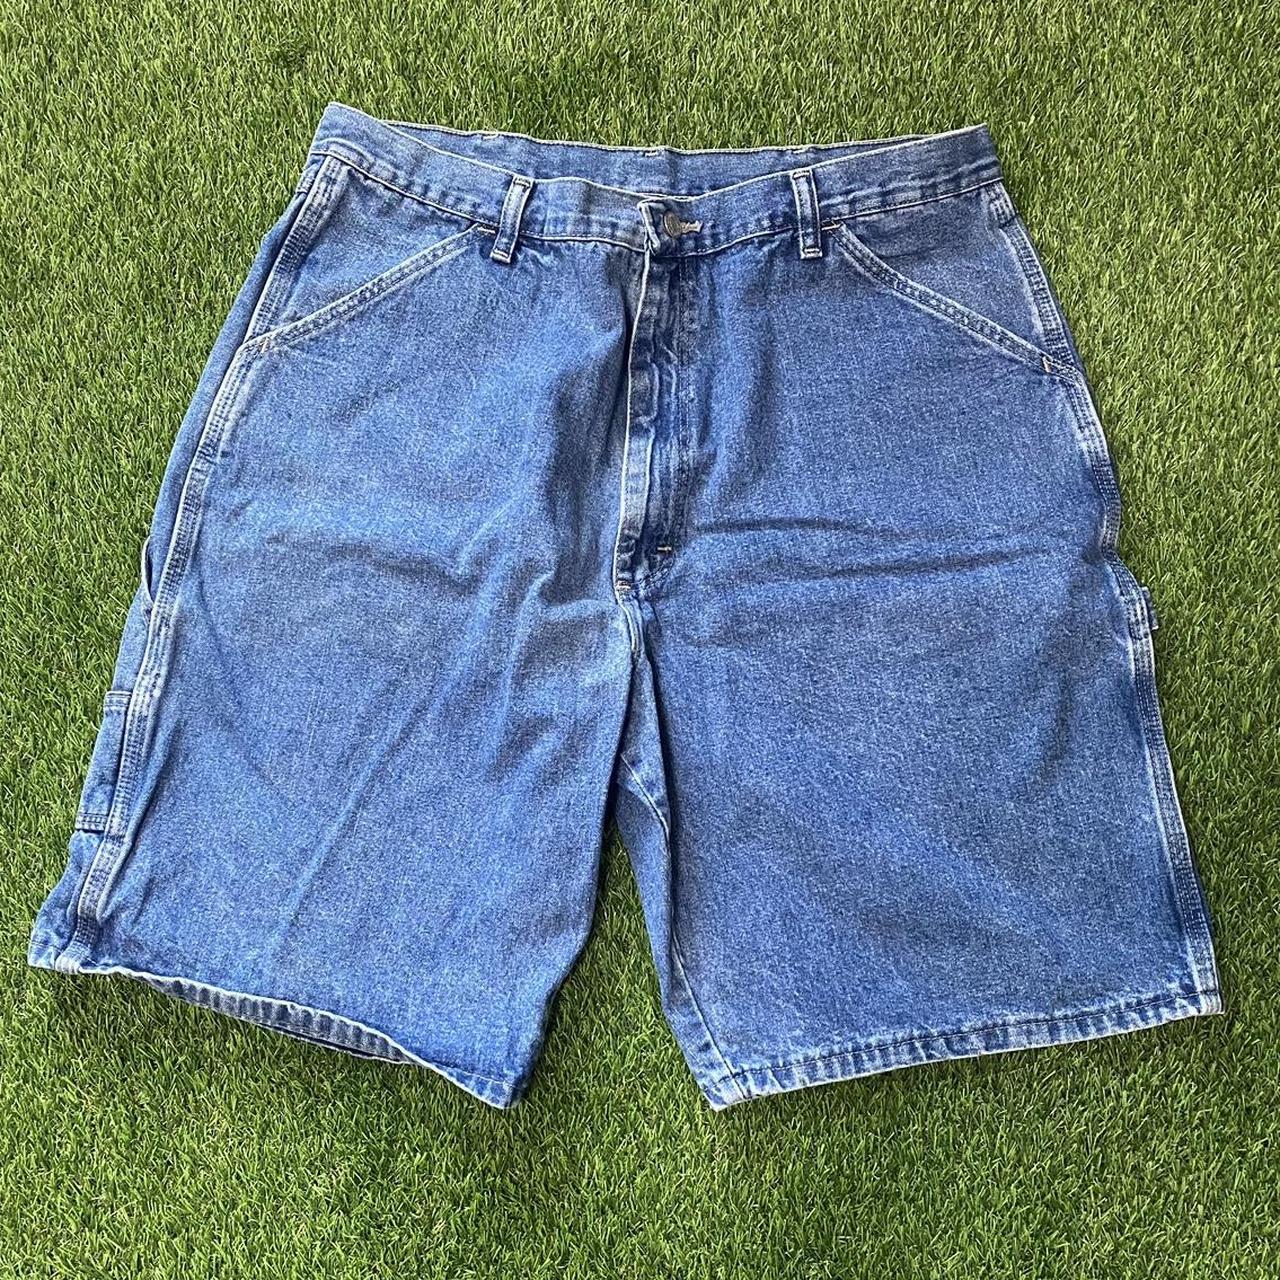 Wrangler Jean Shorts An essential in outfits, a... - Depop